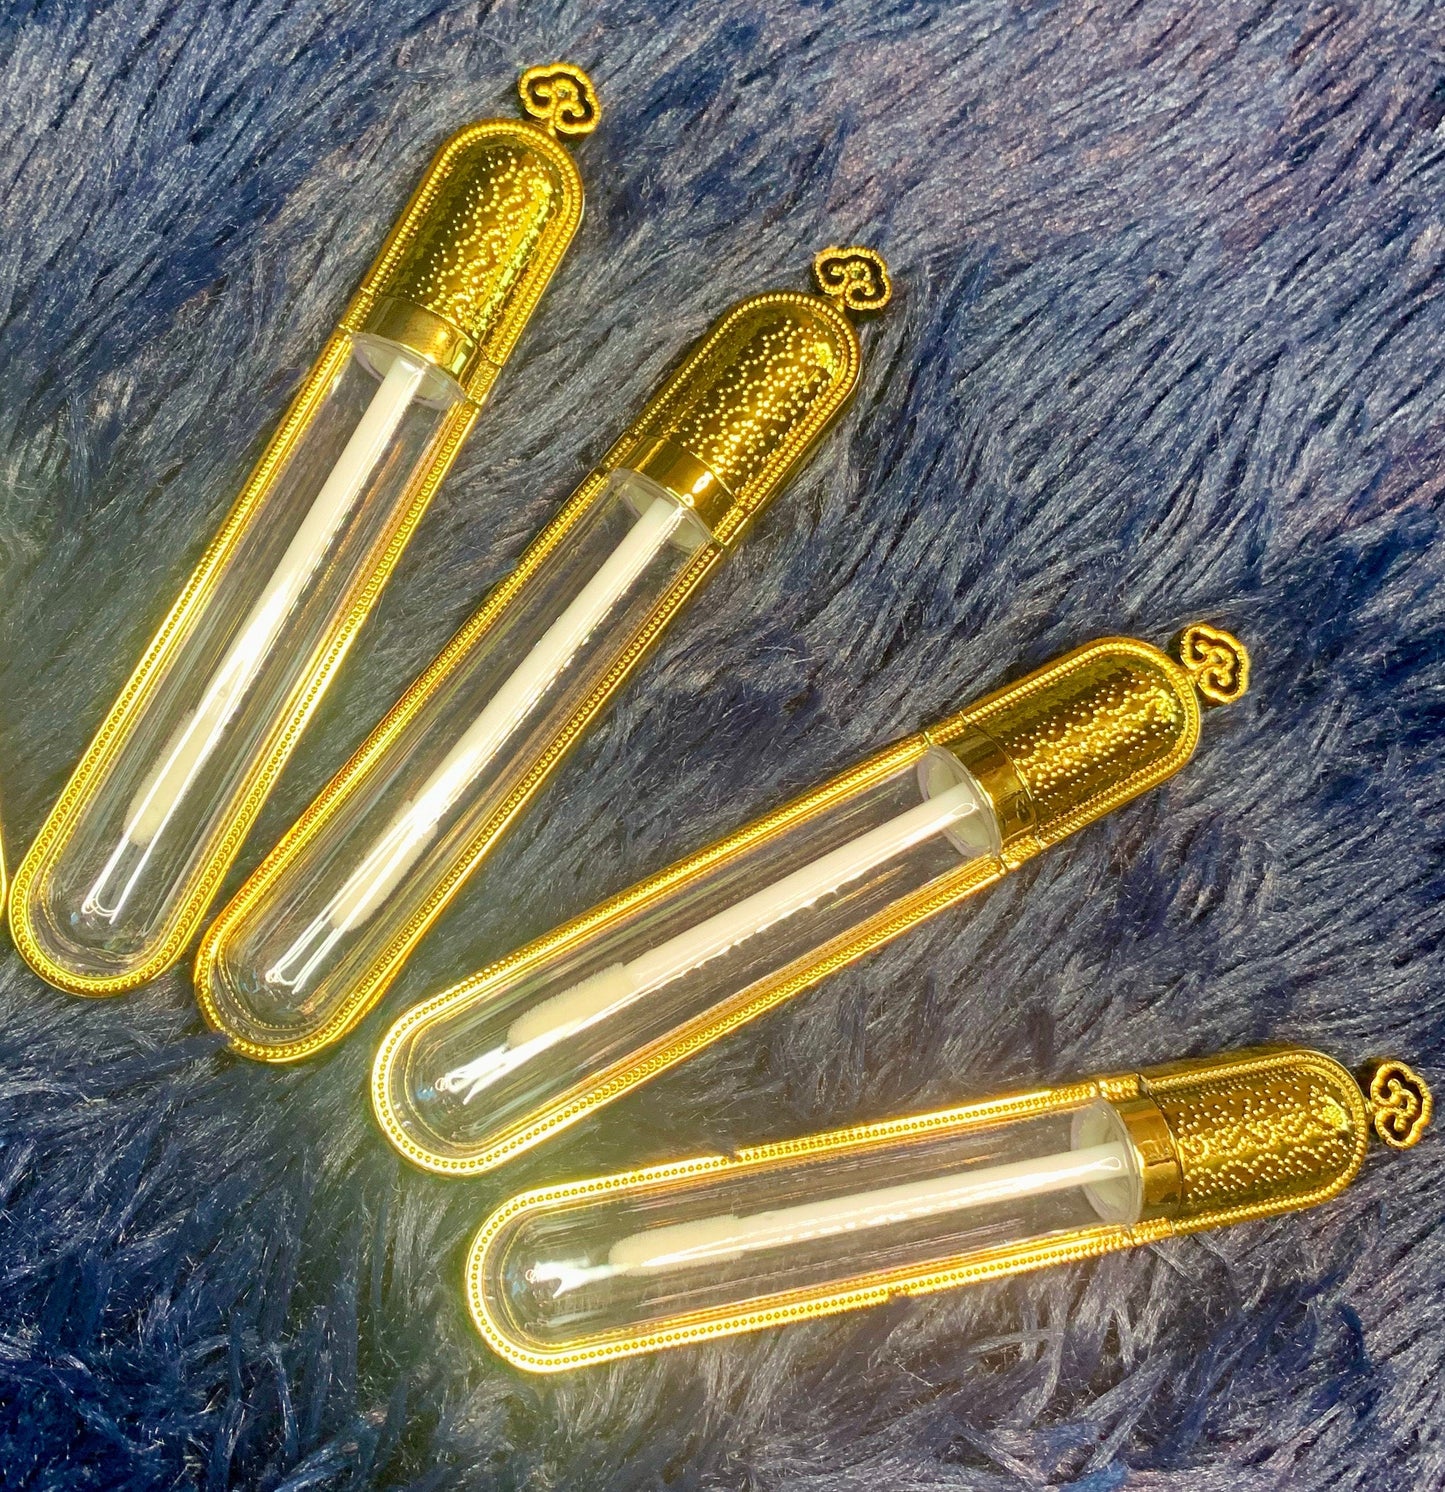  Gold Luxury Lipgloss Tubes